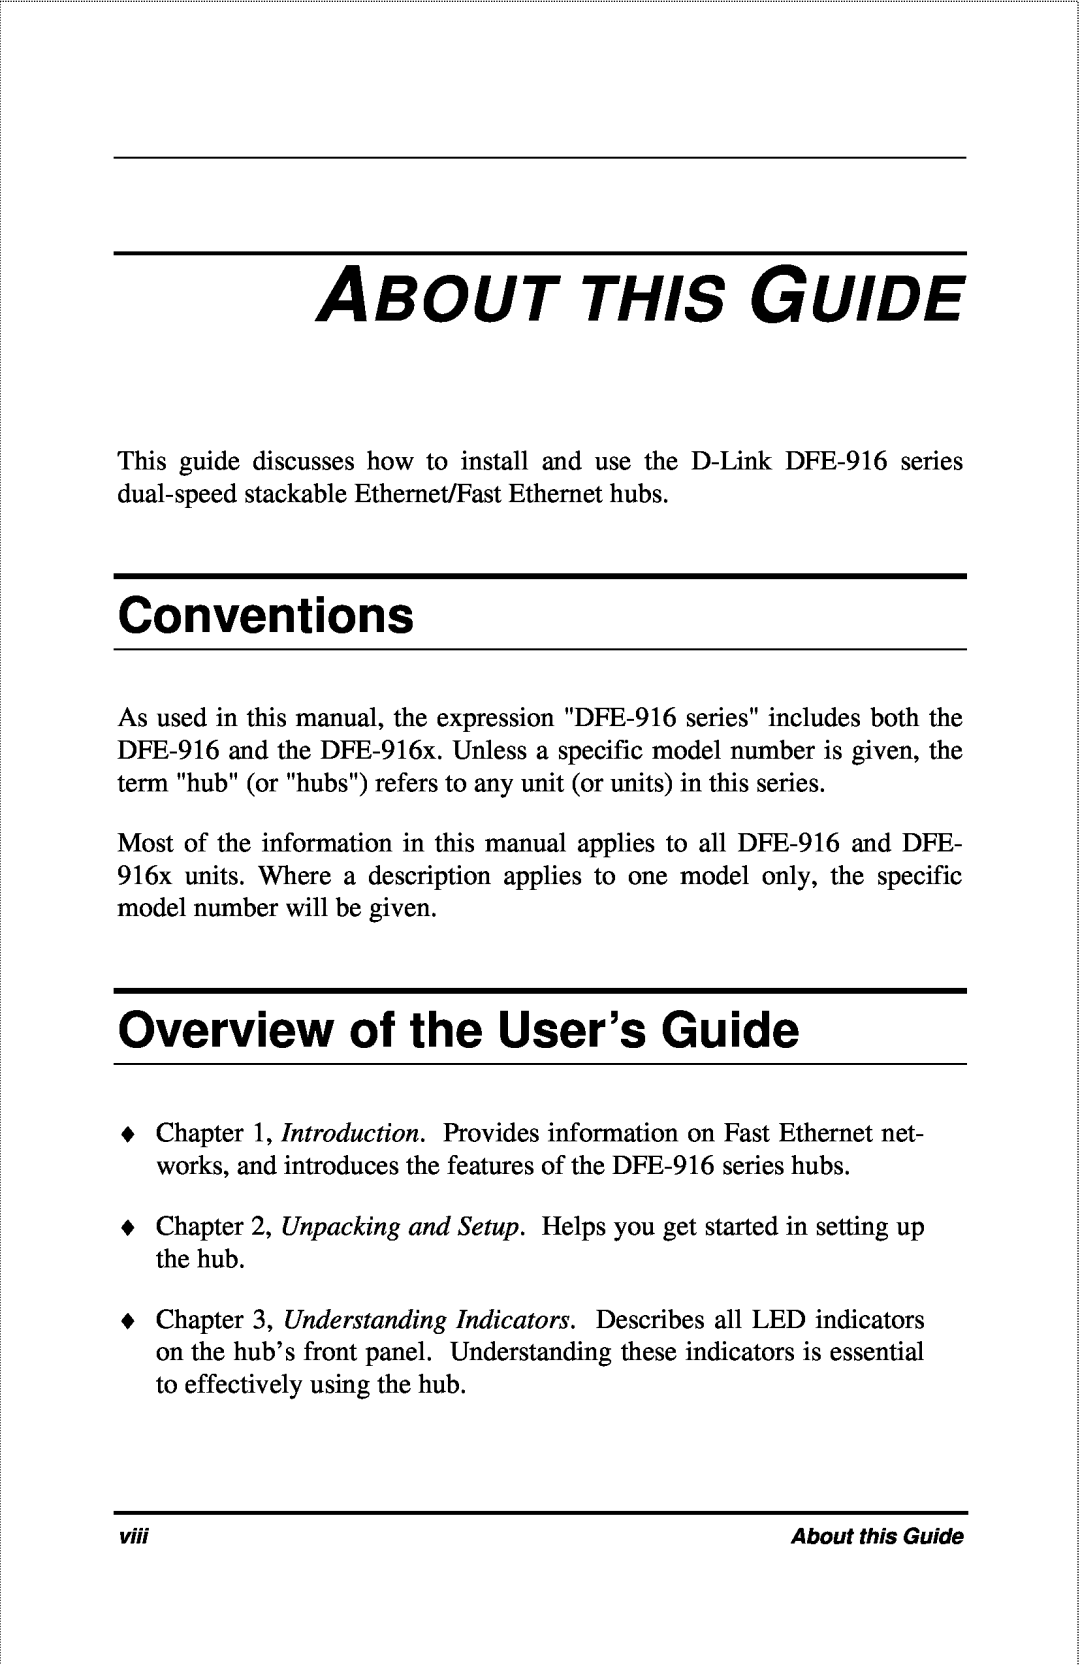 D-Link DFE-916X manual About This Guide, Conventions, Overview of the User’s Guide 